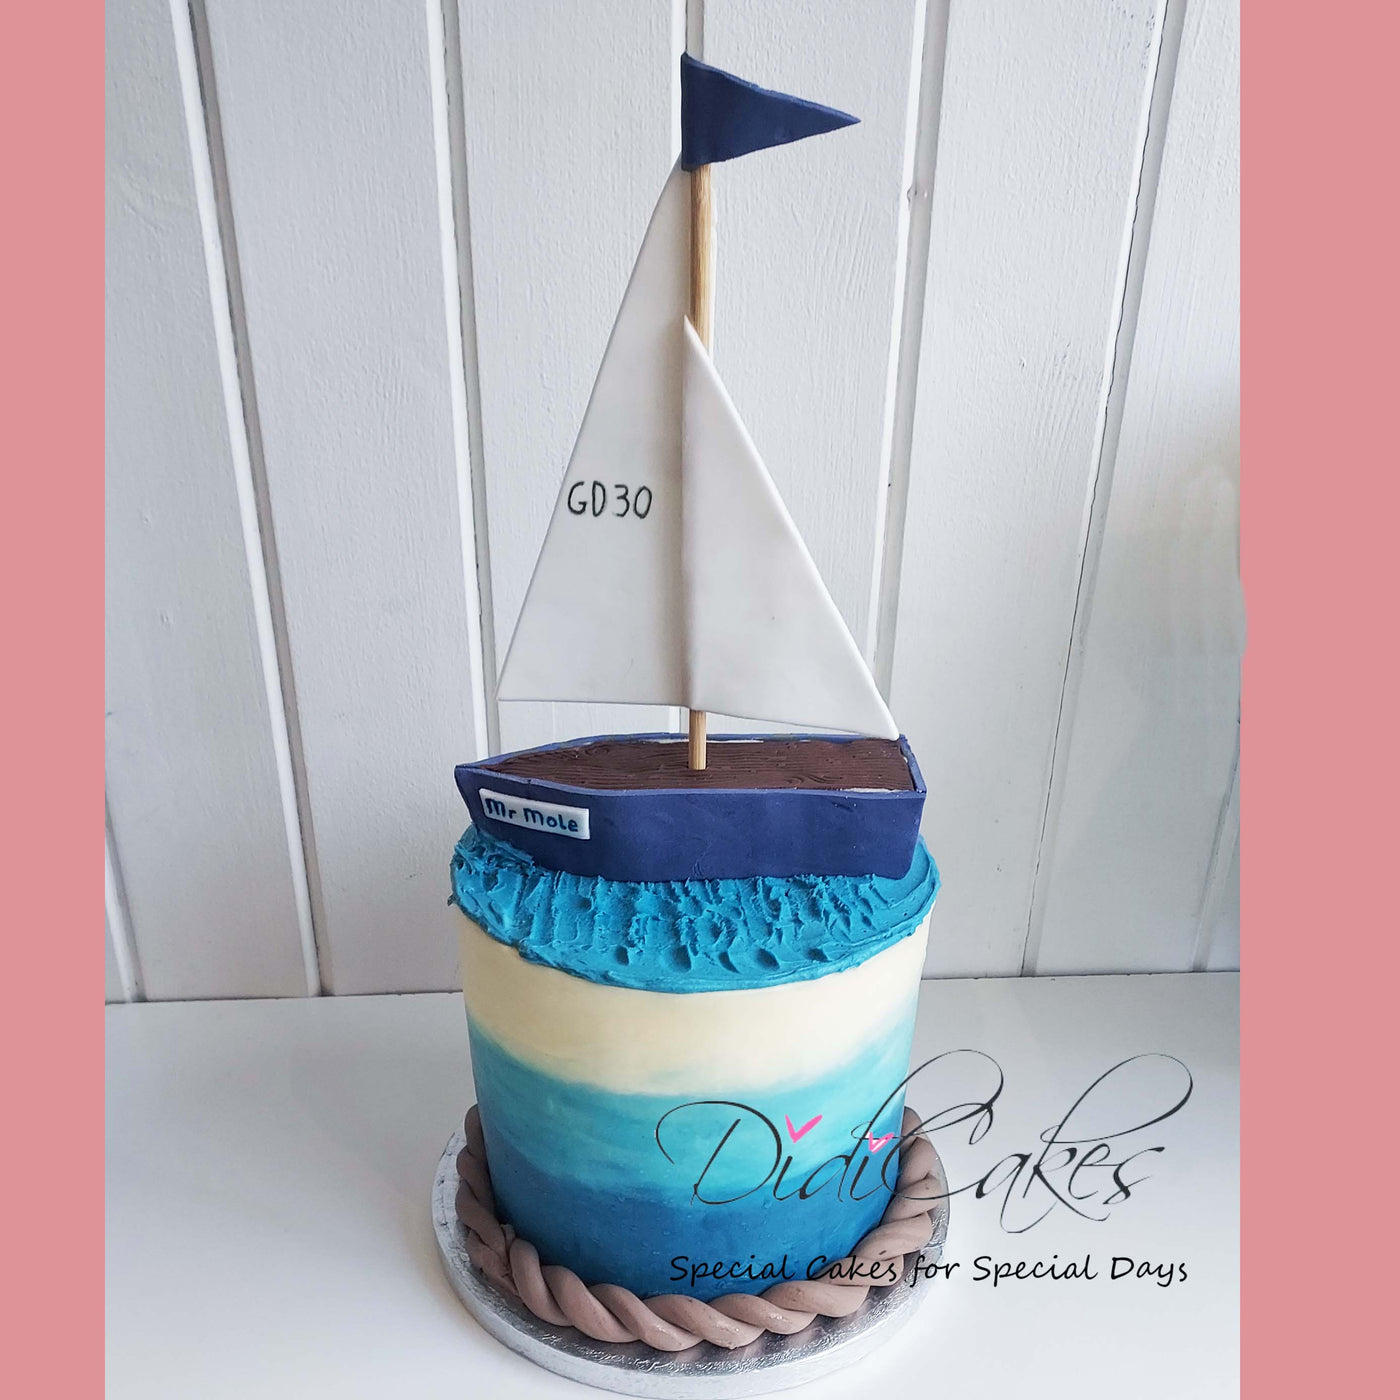 Cake-O-Licious - Let's go fishing, made with Marble mud cake. #fishing #boat  #fish #60th #Birthday #sea #boating #cake #yummy | Facebook